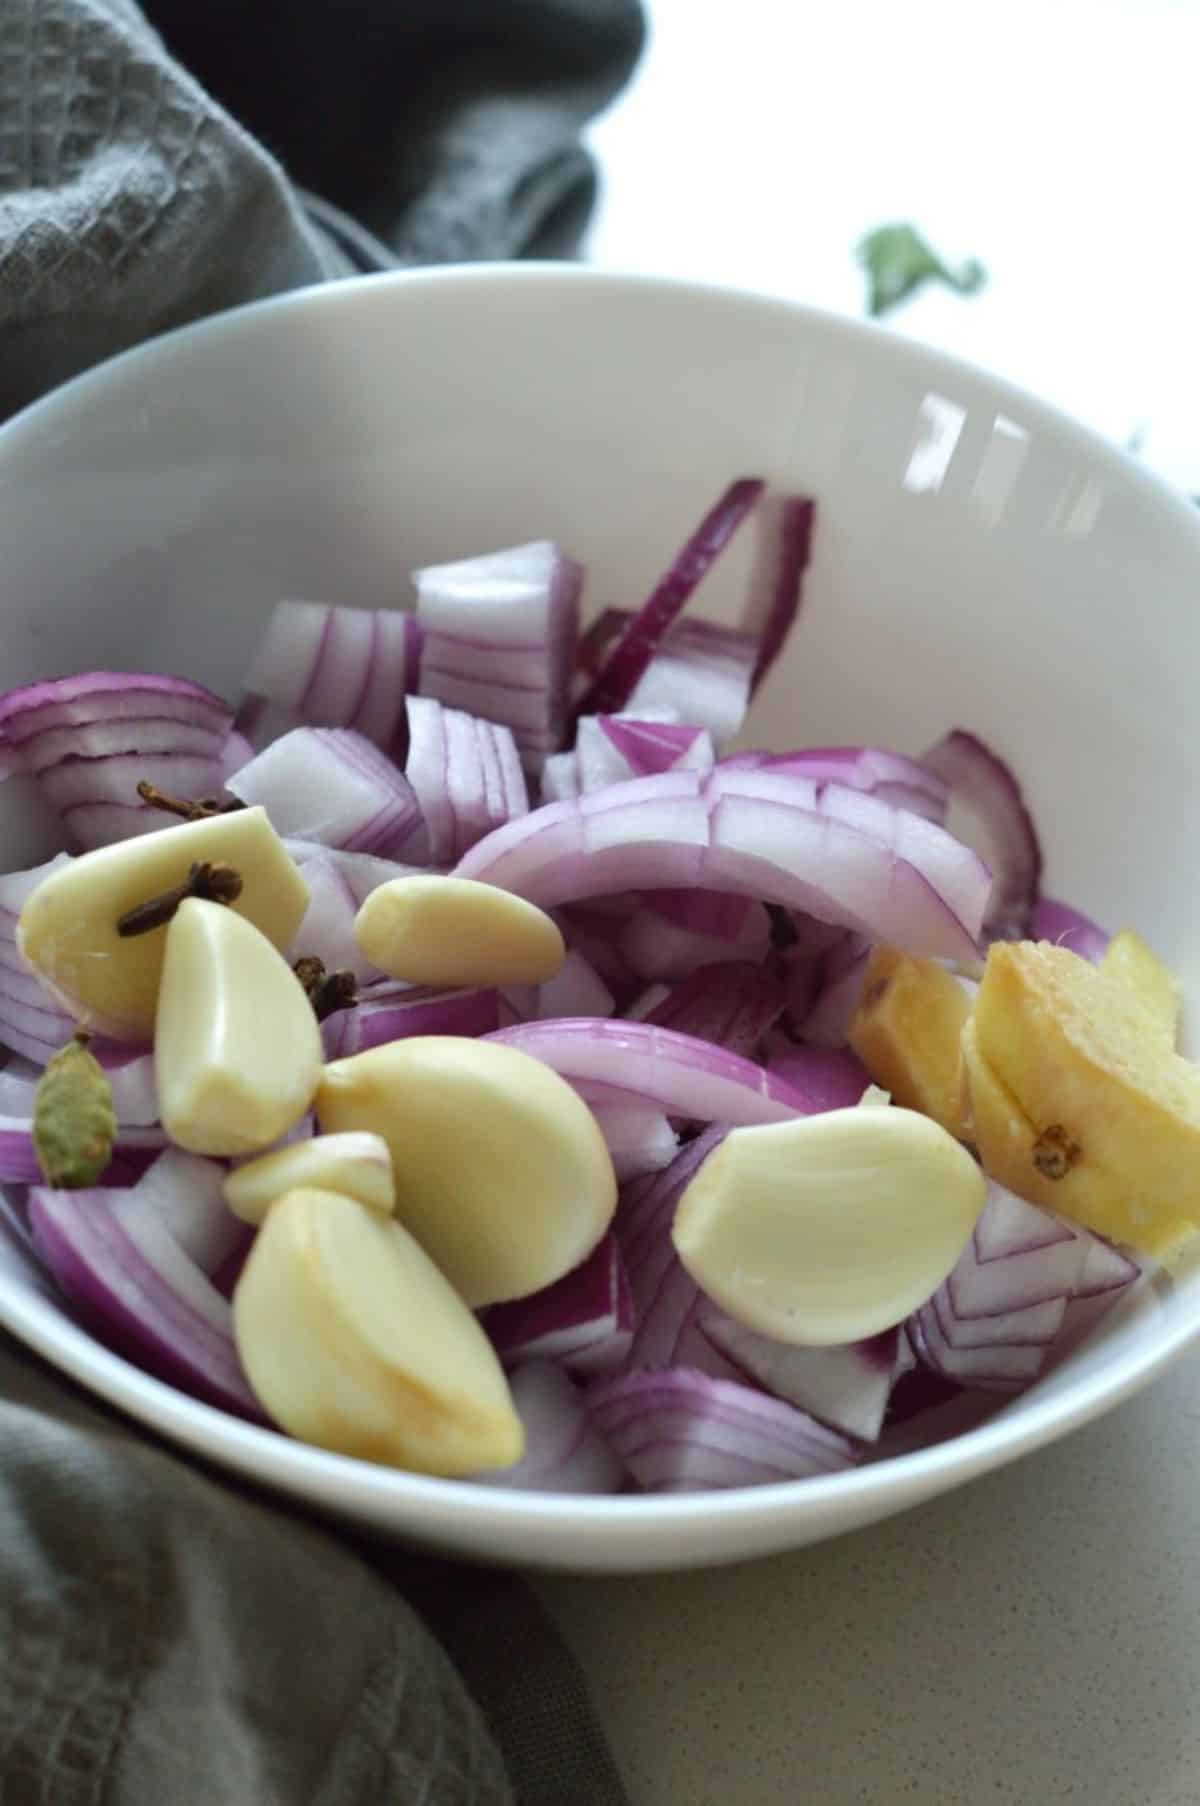 Chopped onions, ginger, garlic in a white bowl.